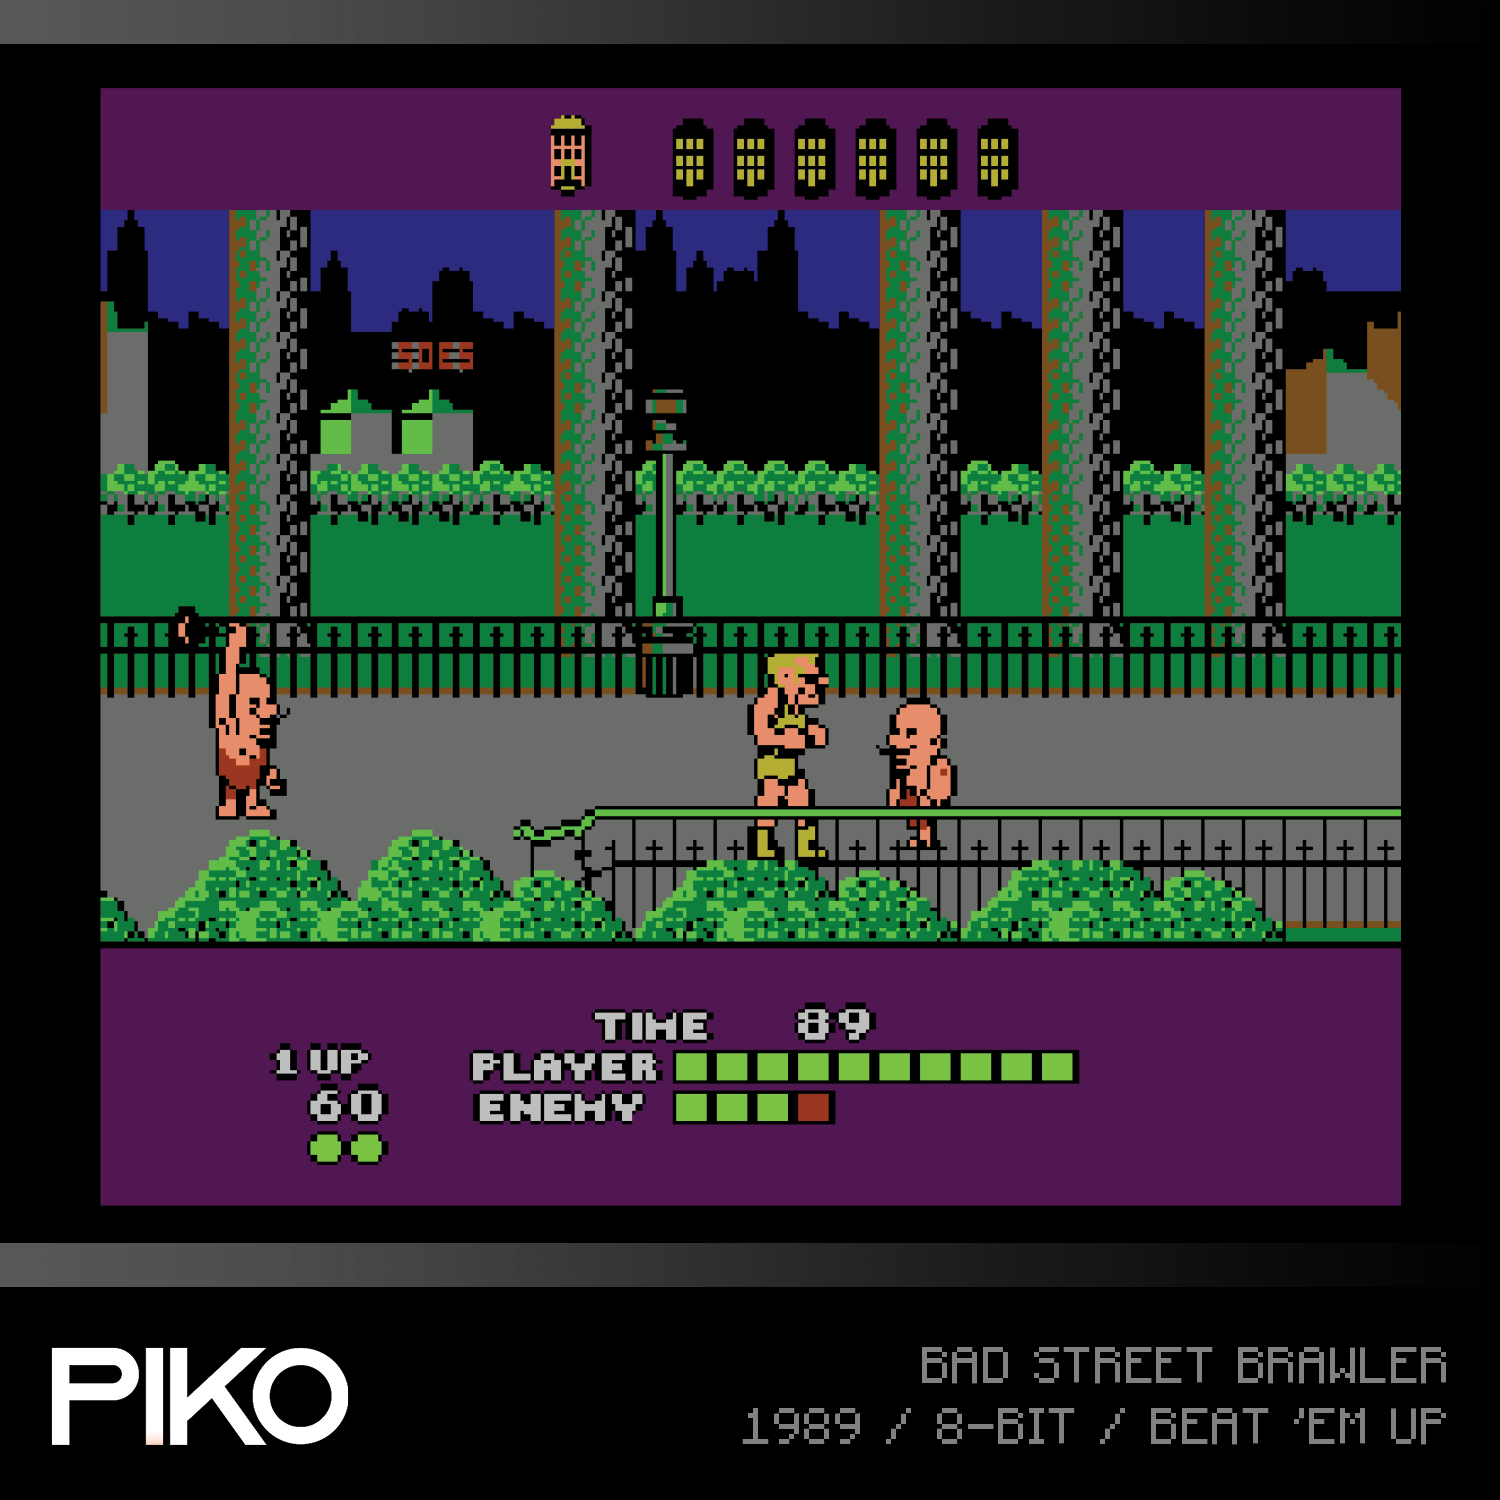 Piko Collection 4 and Sunsoft Collection 2 Double Pack